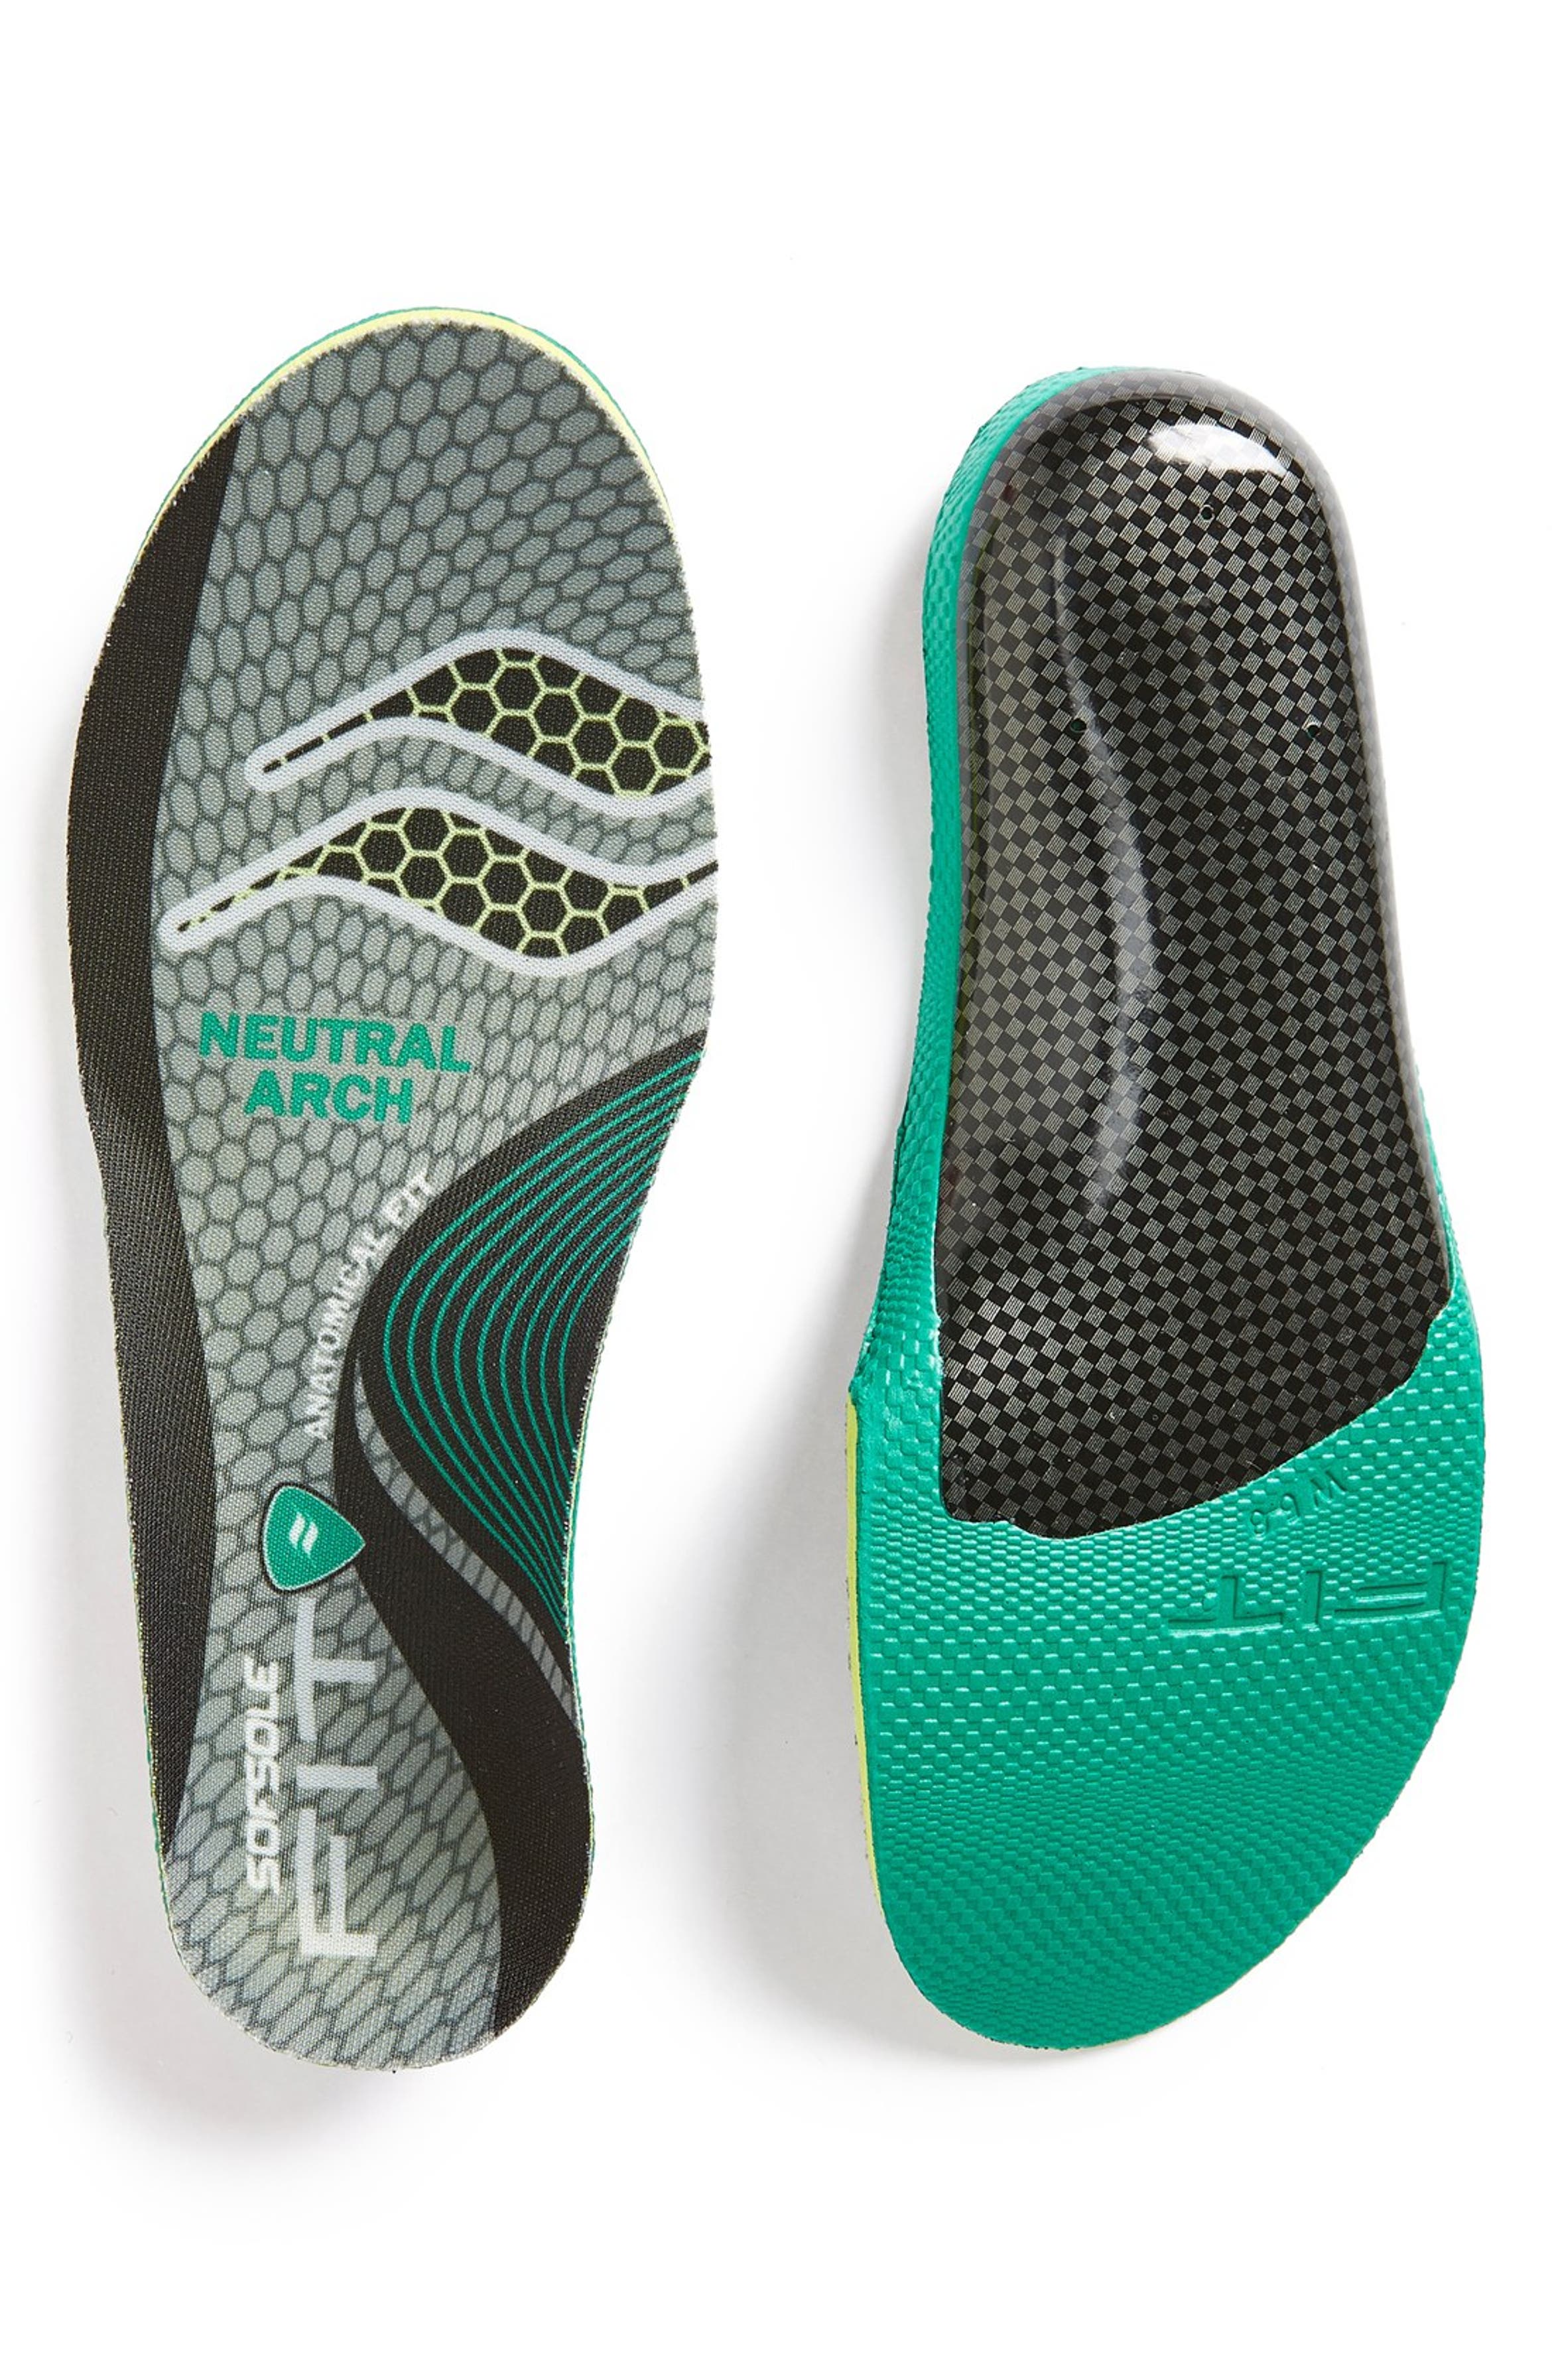 Sof Sole 'Fit Series Neutral Arch' Insole (Women